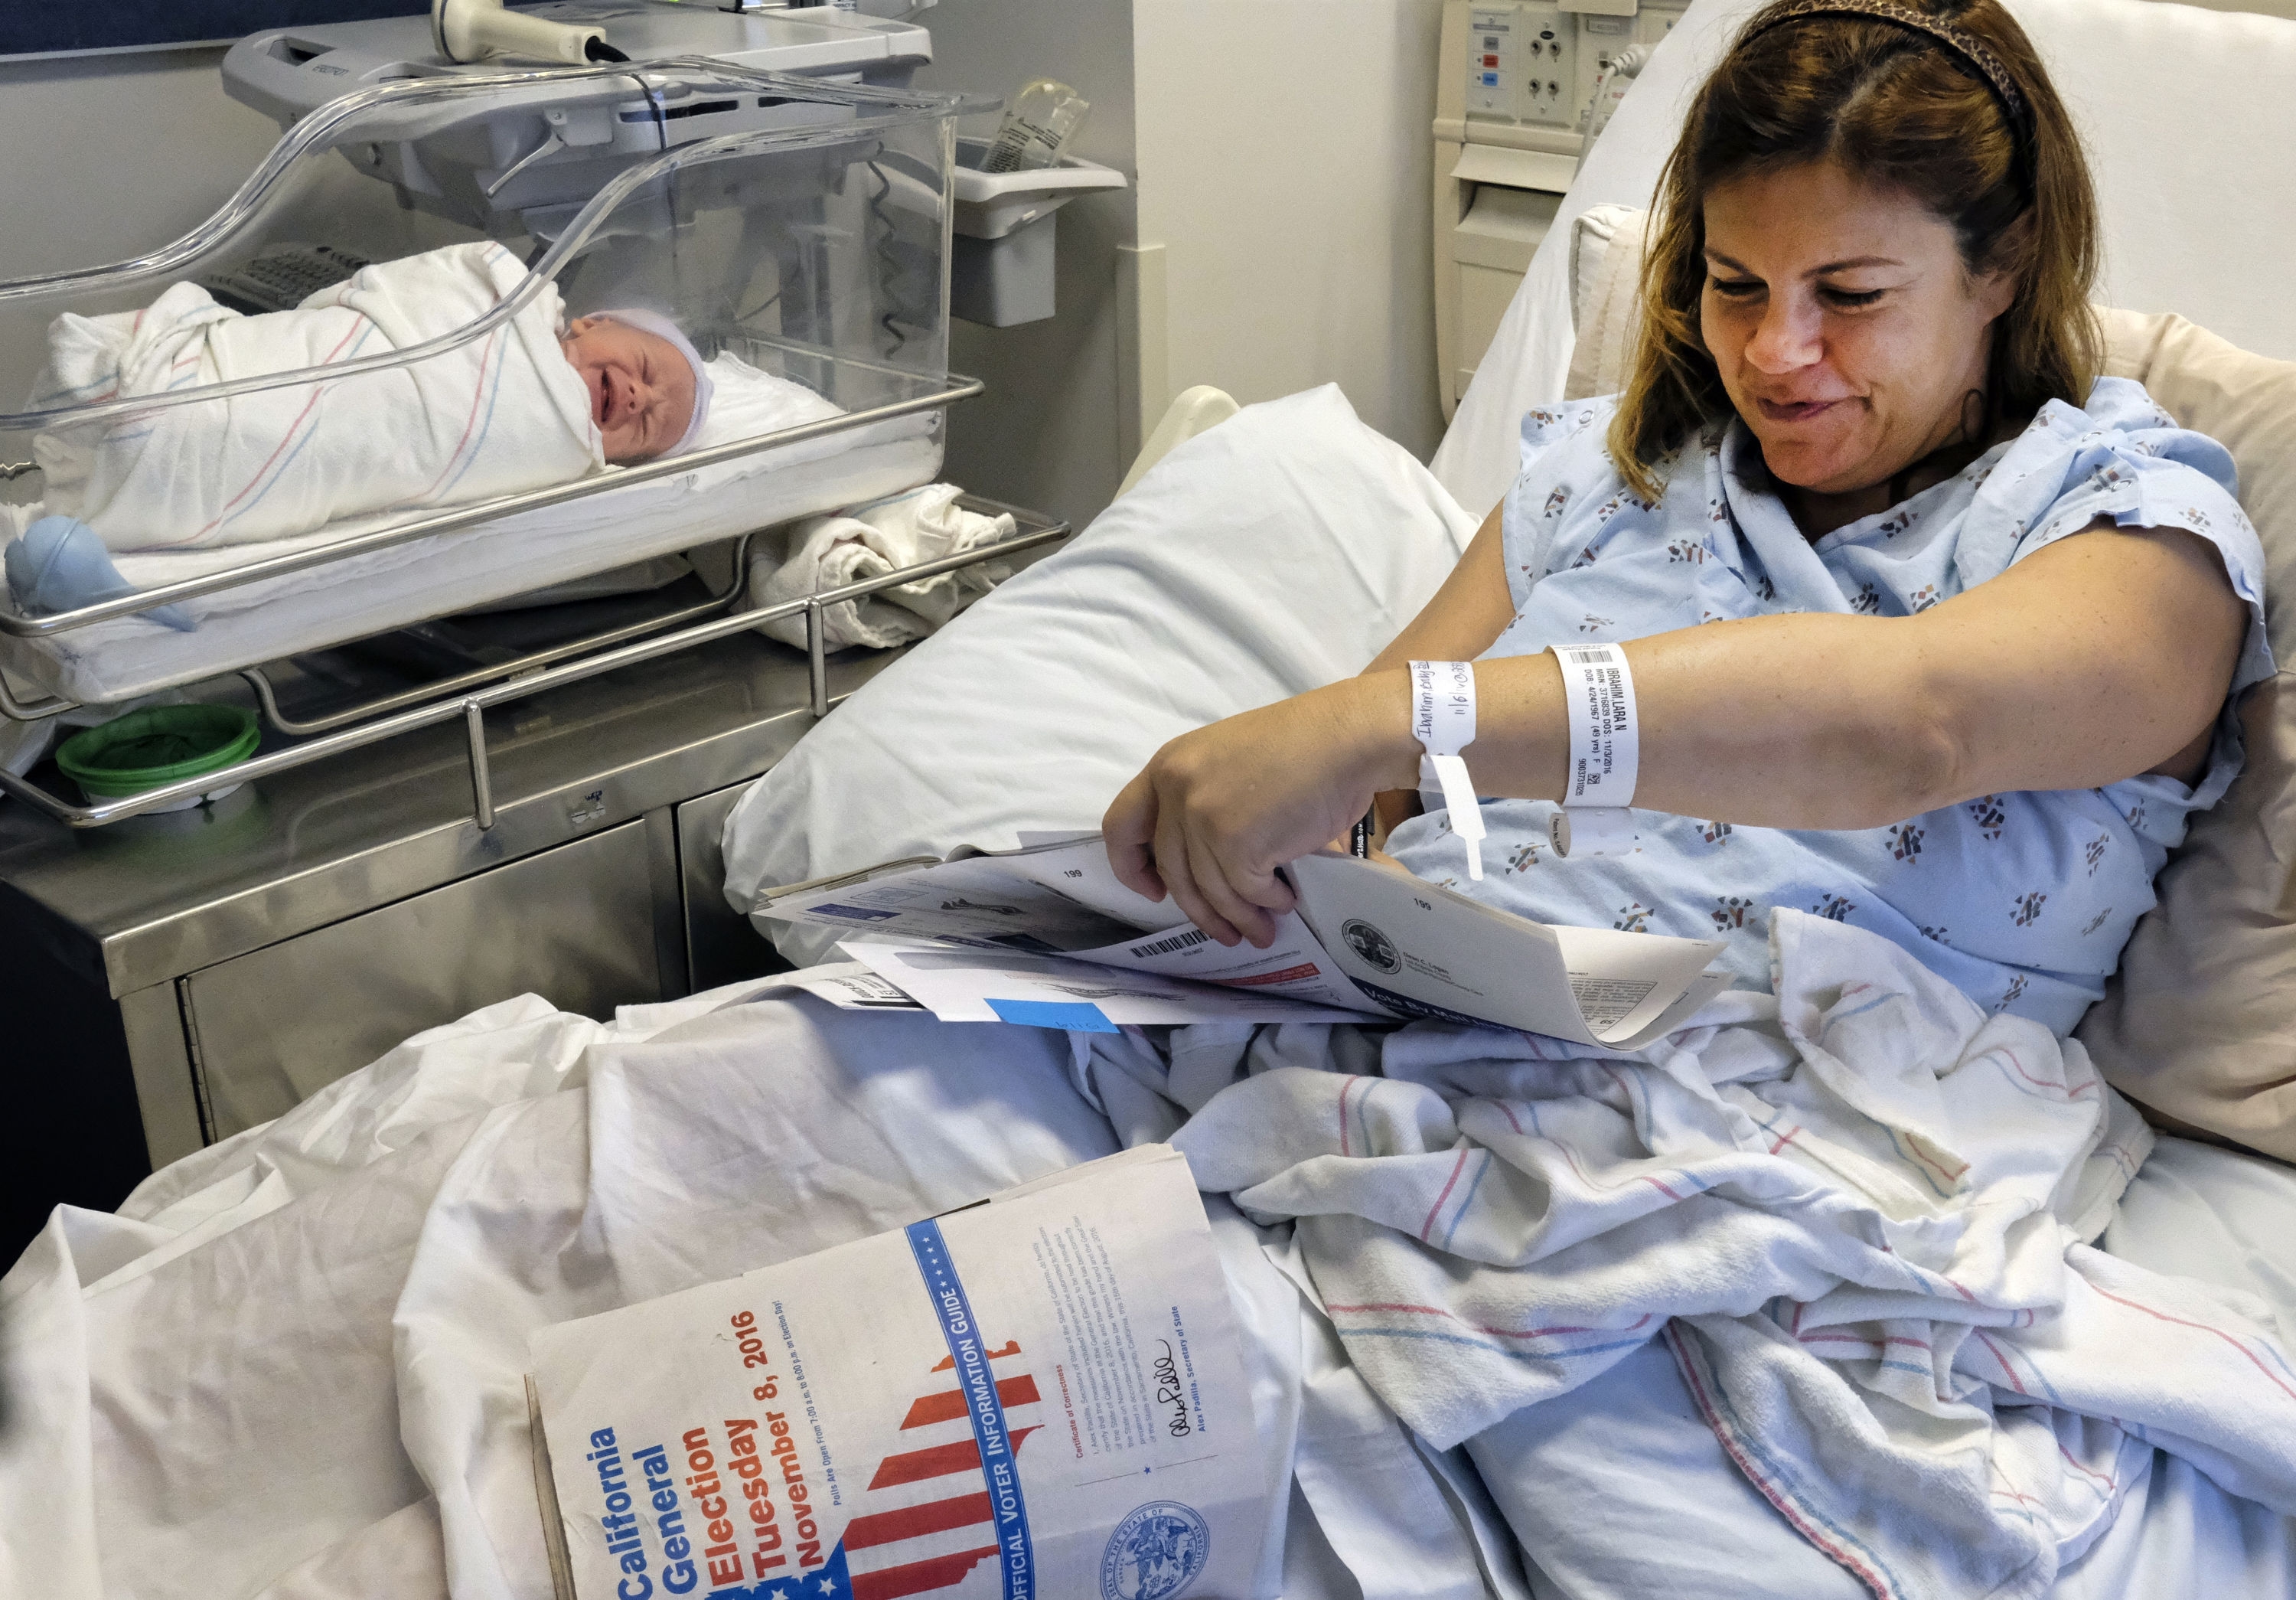 With her newborn son George by her side, Lara Ibrahim fills out her election ballot from her hospital bed at the Ronald Reagan UCLA Medical Center in Los Angeles on Tuesday, Nov. 8, 2016. Dozens of patients at the hospital were able to vote from their beds thanks to a volunteer program. Ibrahim had planned to vote at her usual polling place but ended up giving birth earlier than expected. (AP Photo/Richard Vogel)